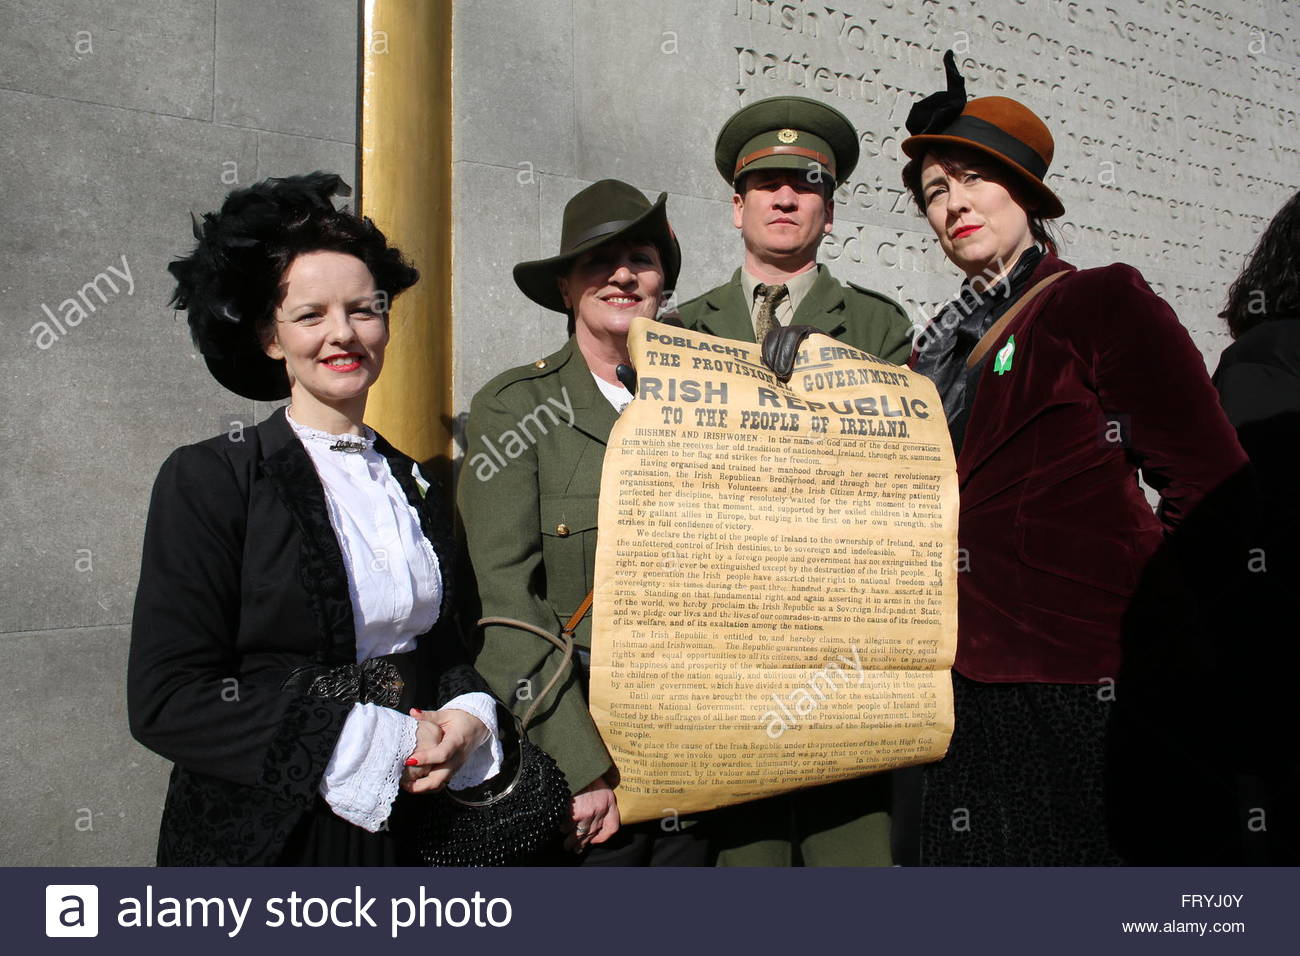 Dublin, Ireland. 25th March, 2016. Participants in the Sinn Fein 1916 centenary rally hold a copy of the proclamation of irish Independence in Dublin today Credit:  reallifephotos/Alamy Live News Stock Photo